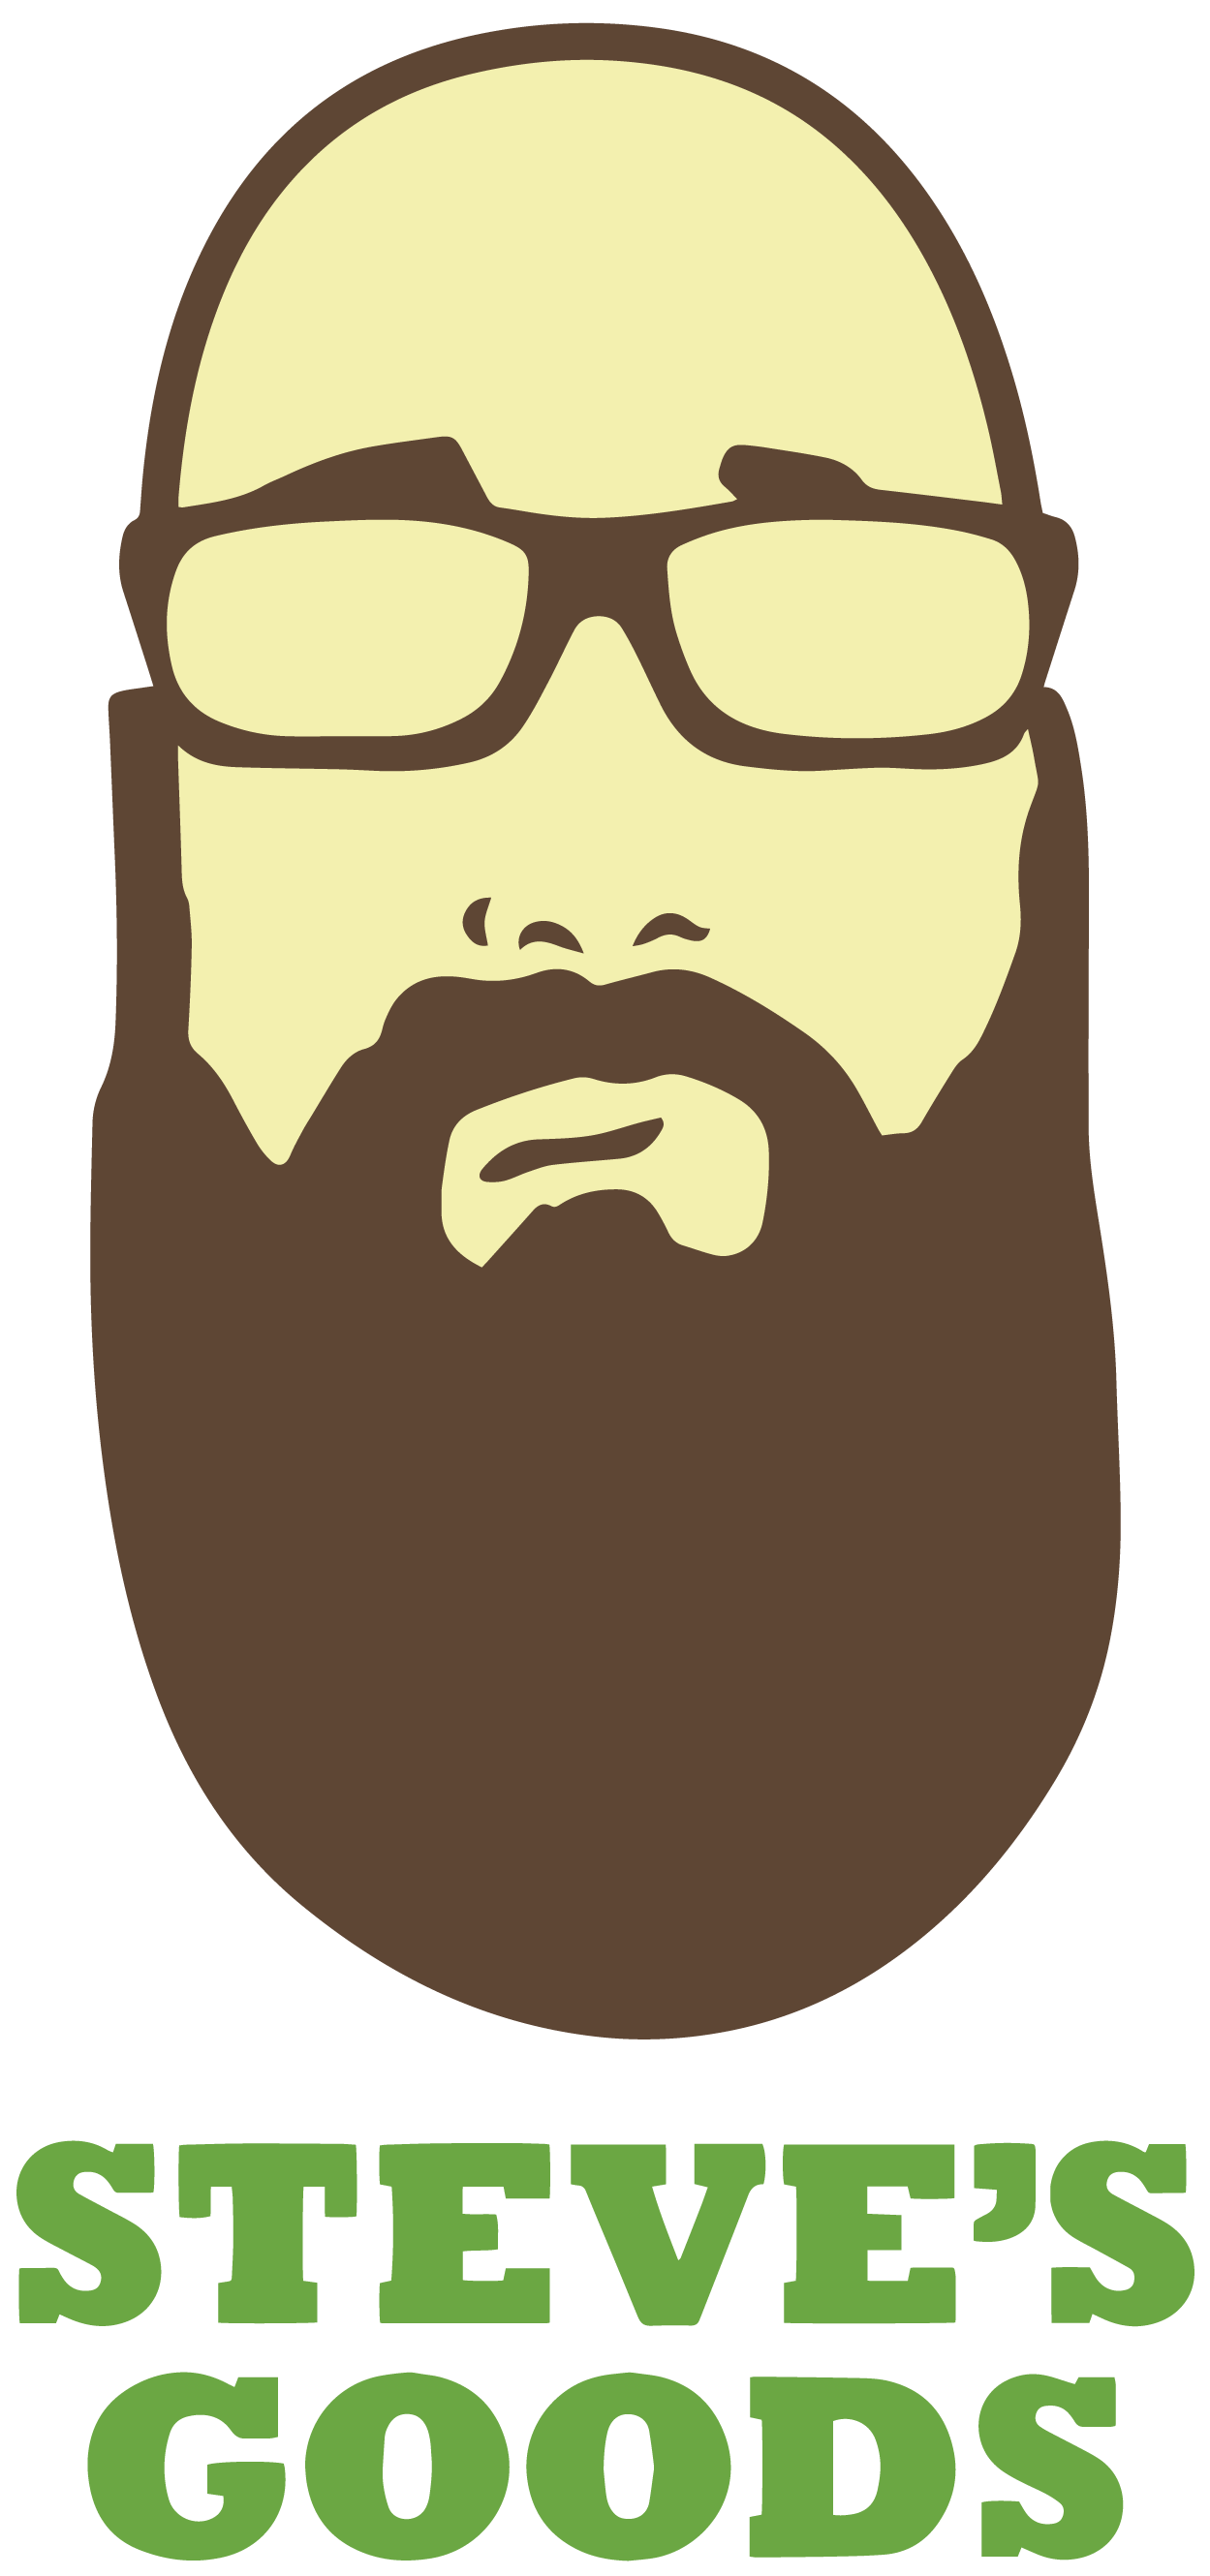 A Man With A Beard And Glasses